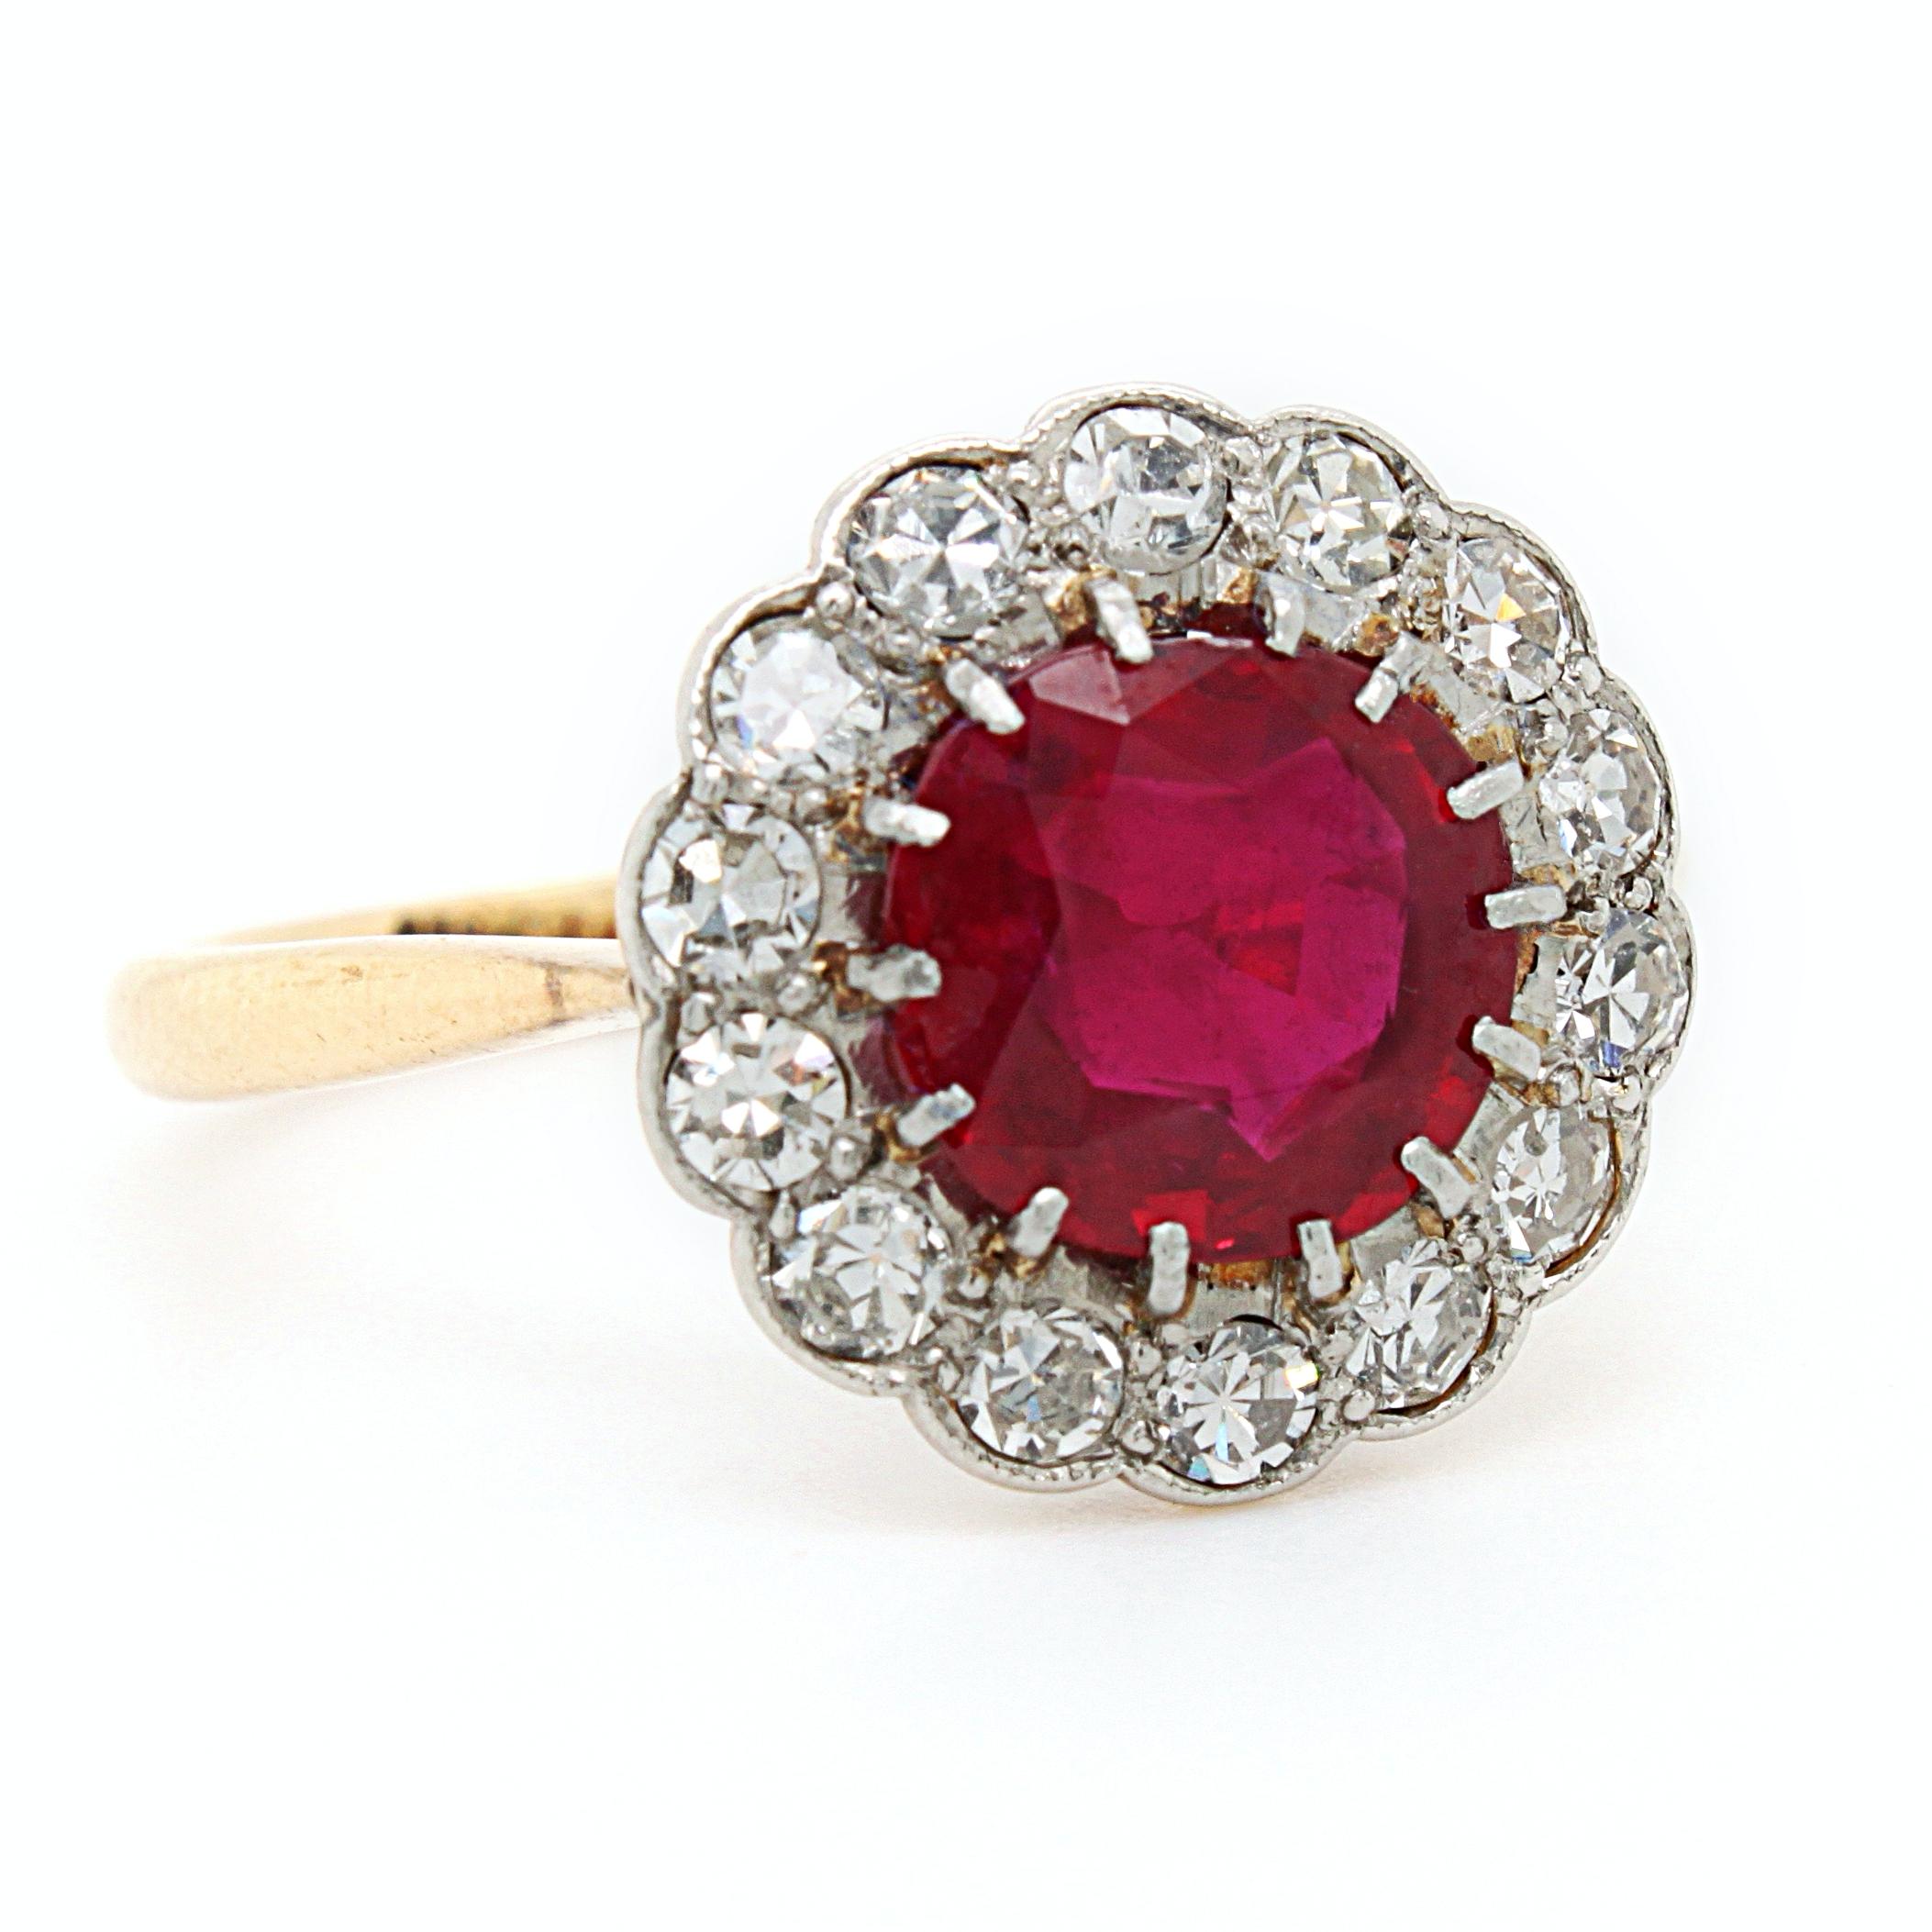 Pigeon Blood Ruby 'No Heat, Burma' and Diamond Cluster Ring, ca. 1900 For Sale 2